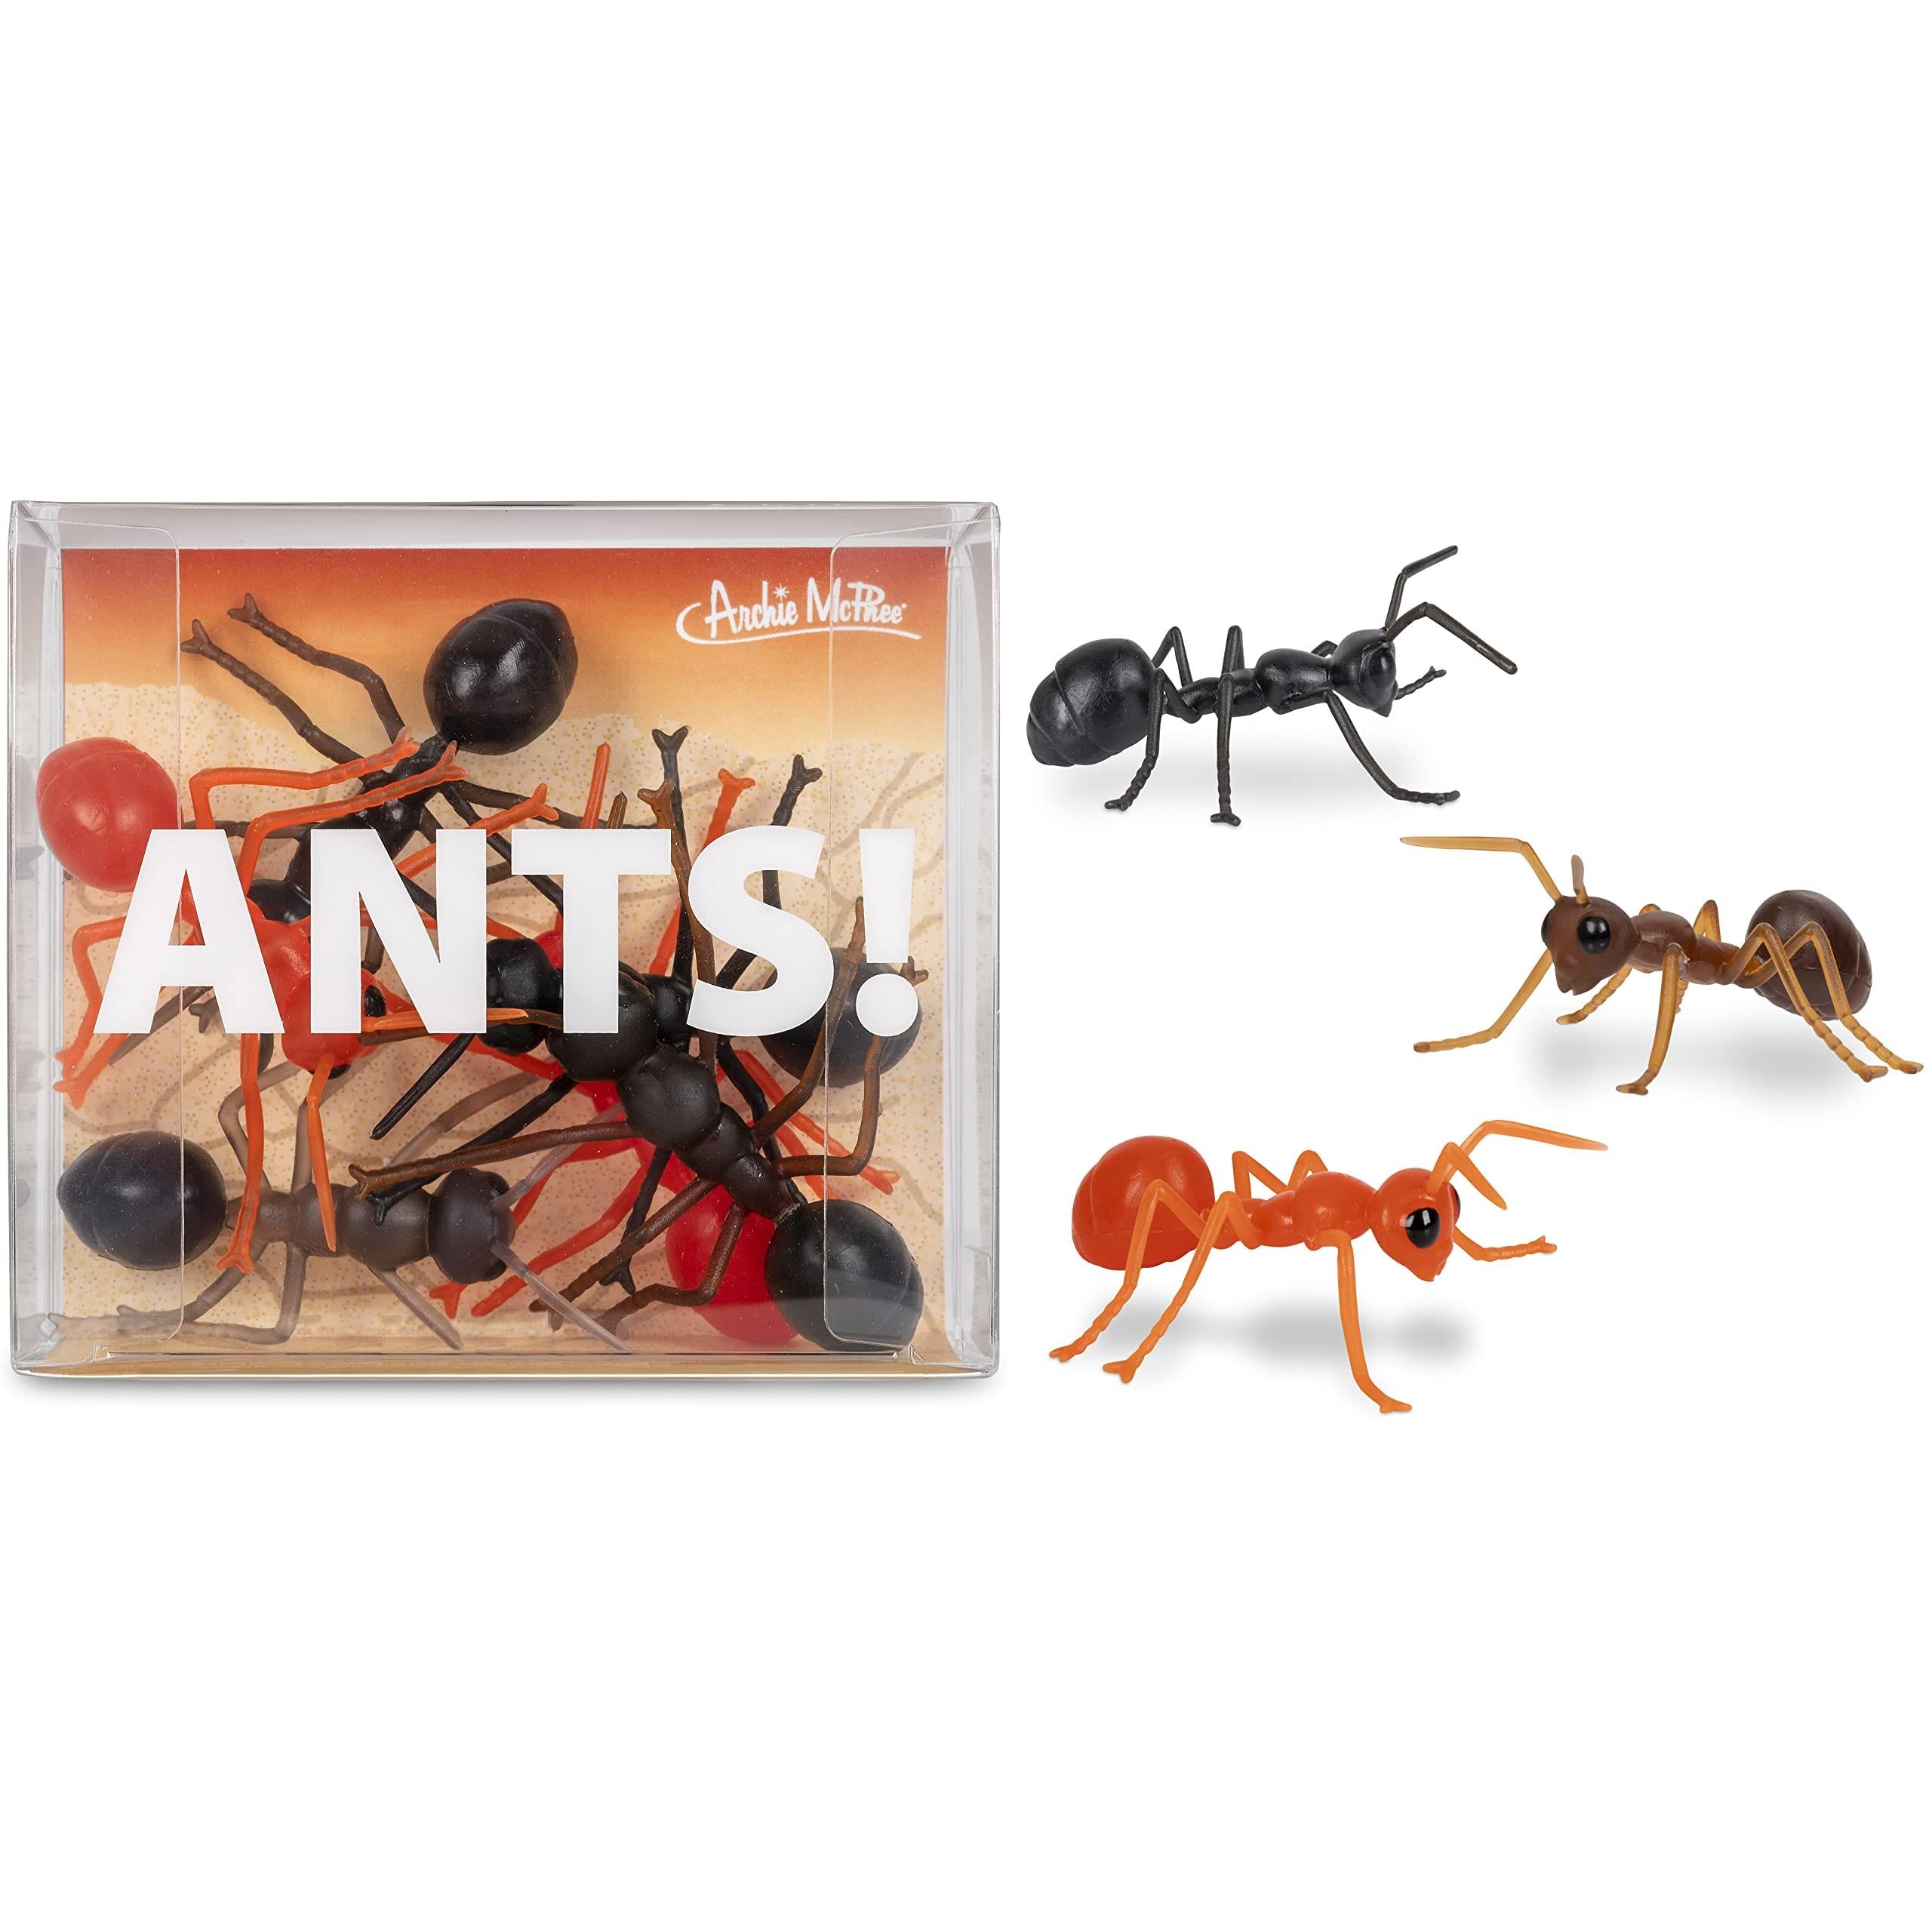 Mcphee Accoutrements Archie Funny Gift Box of Novelty Ants (6 Pack)